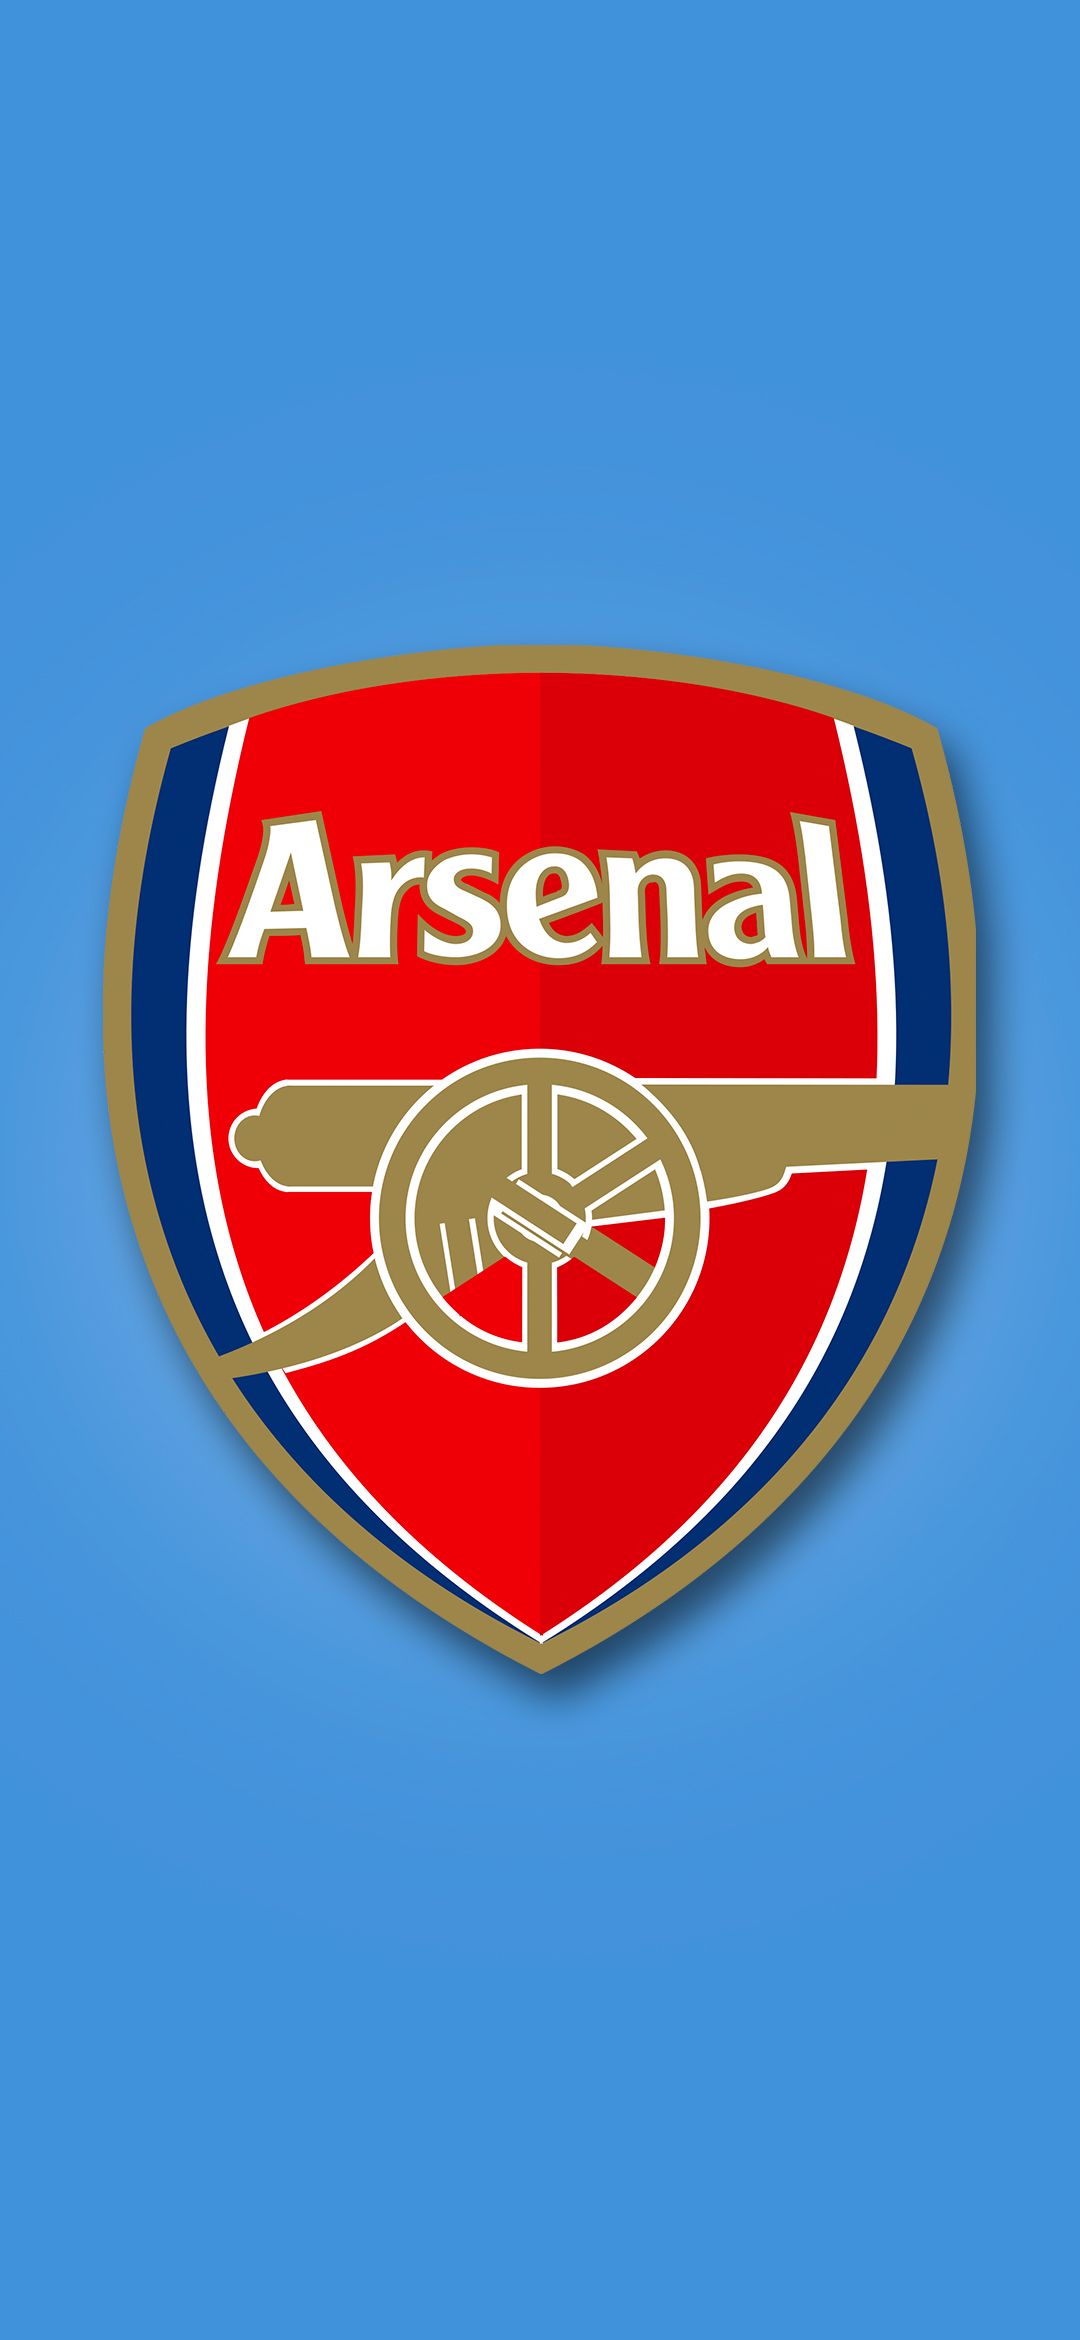 Arsenal FC iPhone Wallpapers - 4k, HD Arsenal FC iPhone Backgrounds on ...